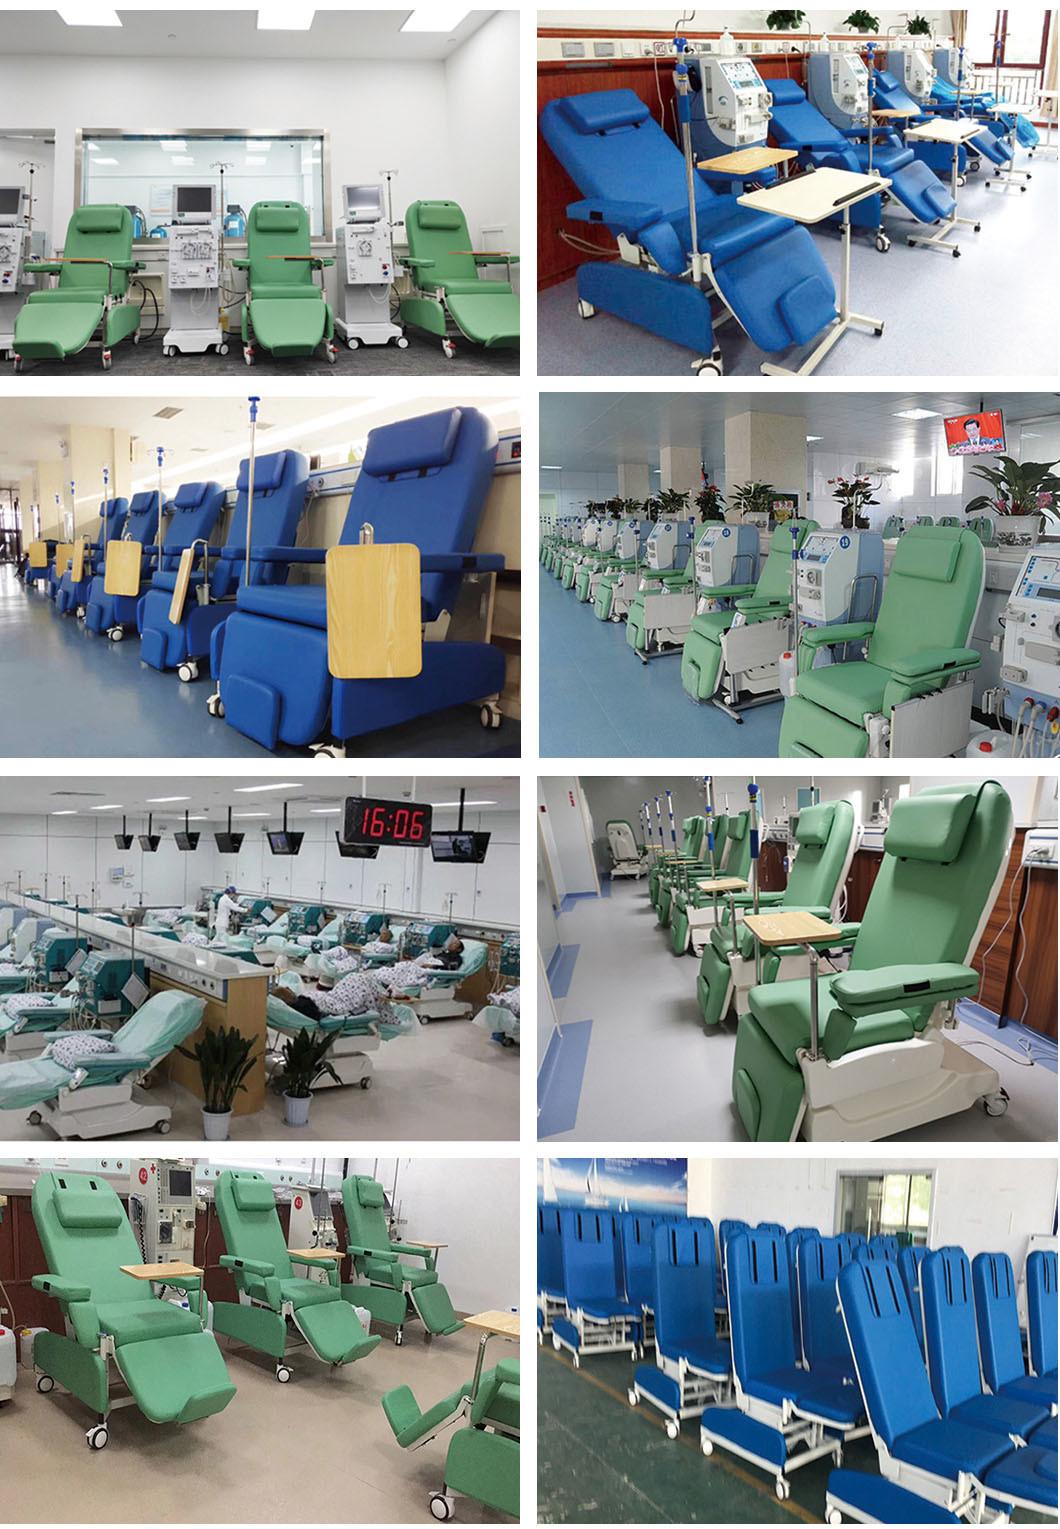 Medical Device Hemodialysis Treatment Chair Economic Electric Medical Dialysis Blood Donate Chair